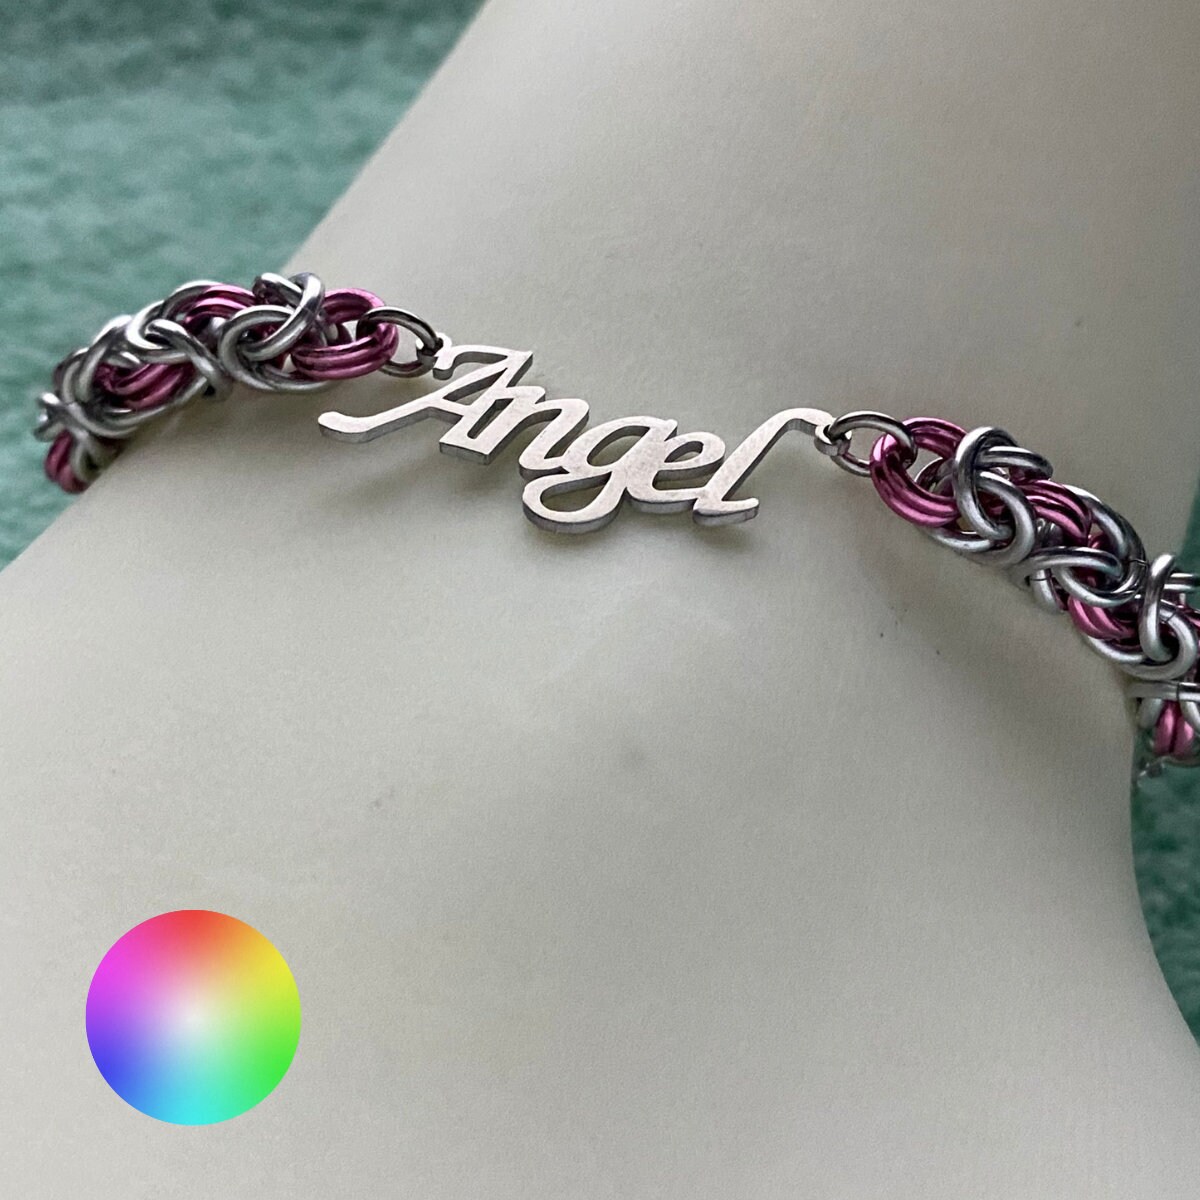 Personalized Bracelet Beads Letters, Numbers, Patterns  